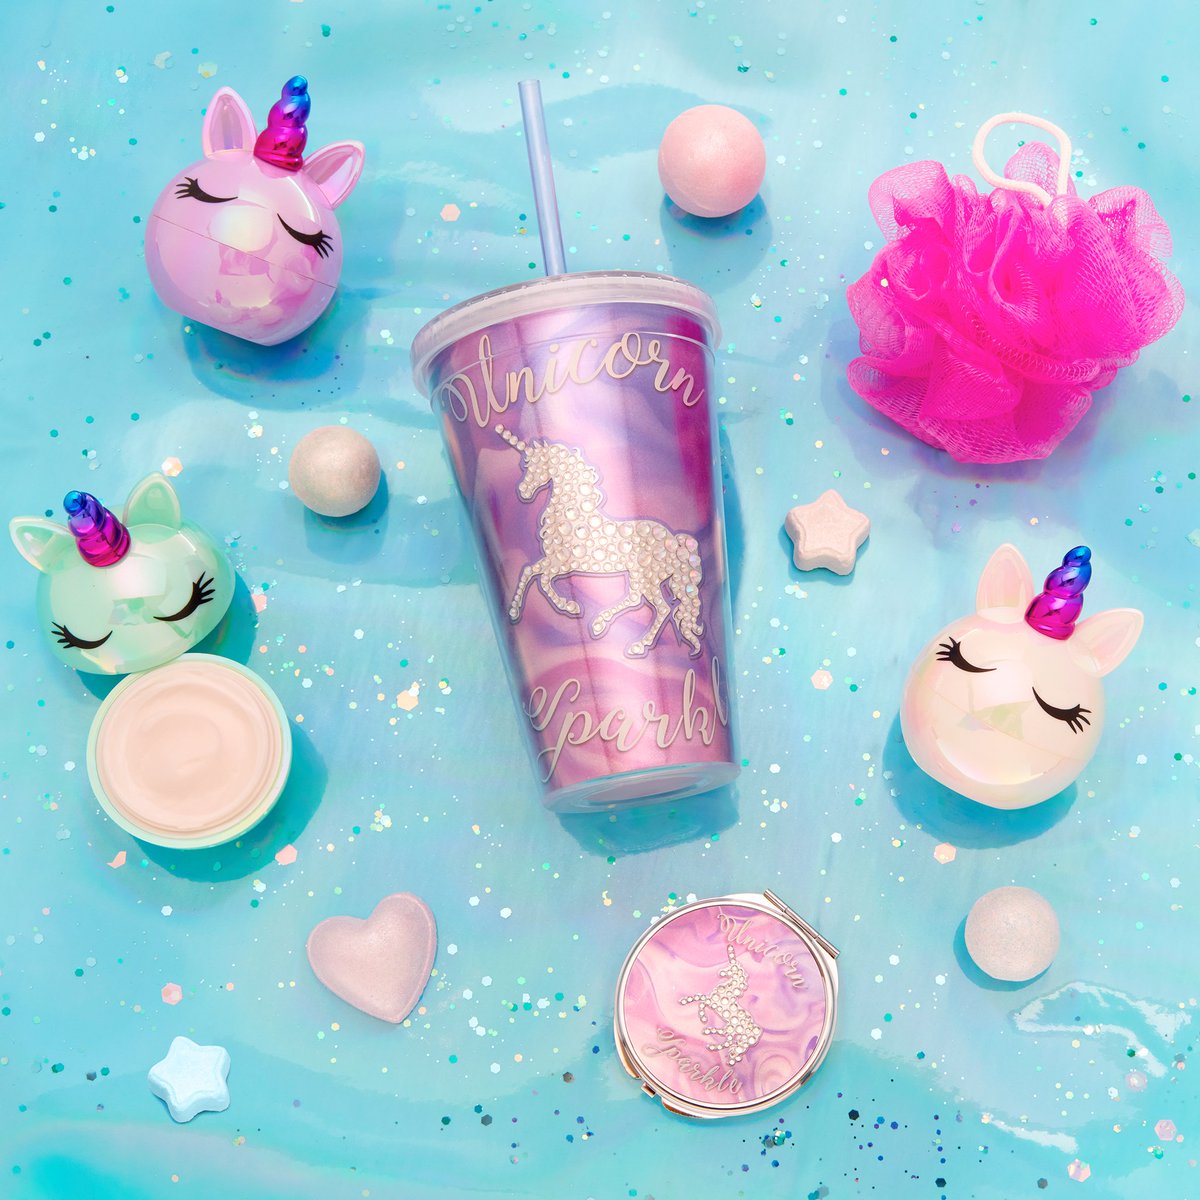 Claire's on Twitter: "Relax and unwind with unicorn bath 🦄🦄 Shop in store and online now #ItsAtClaires https://t.co/8BOUQj7GQn" / Twitter